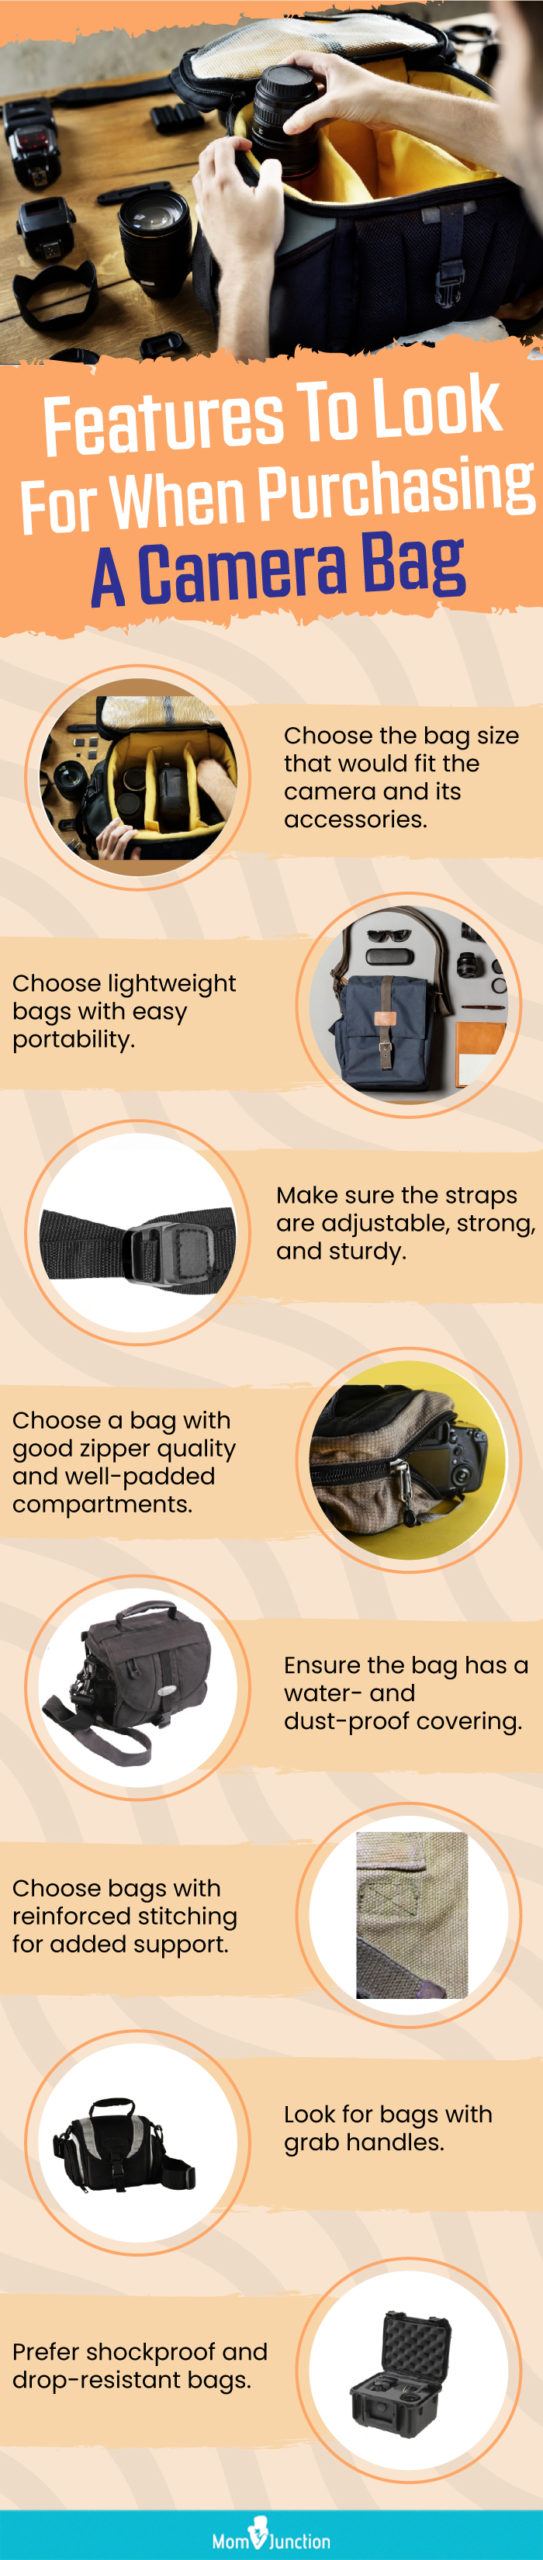 Features To Look For When Purchasing A Camera Bag (infographic)